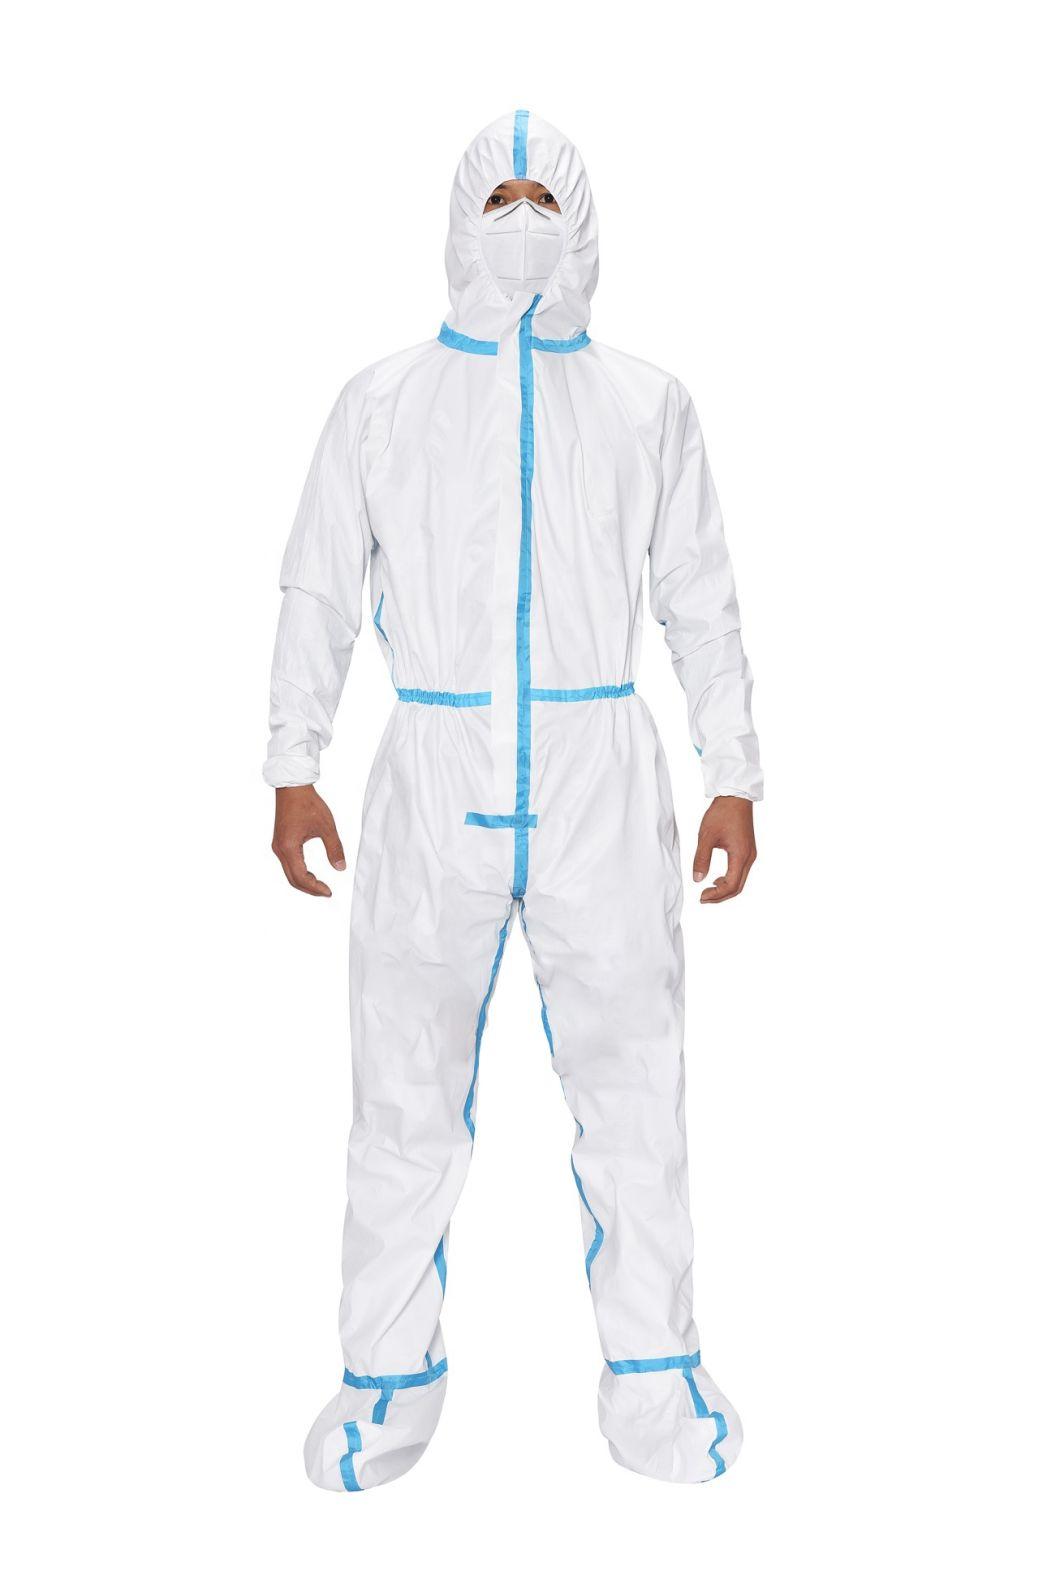 Disposable Isolation Hooded Uniforms Protective Equipment with Tape for Hospital Doctor and Nurse